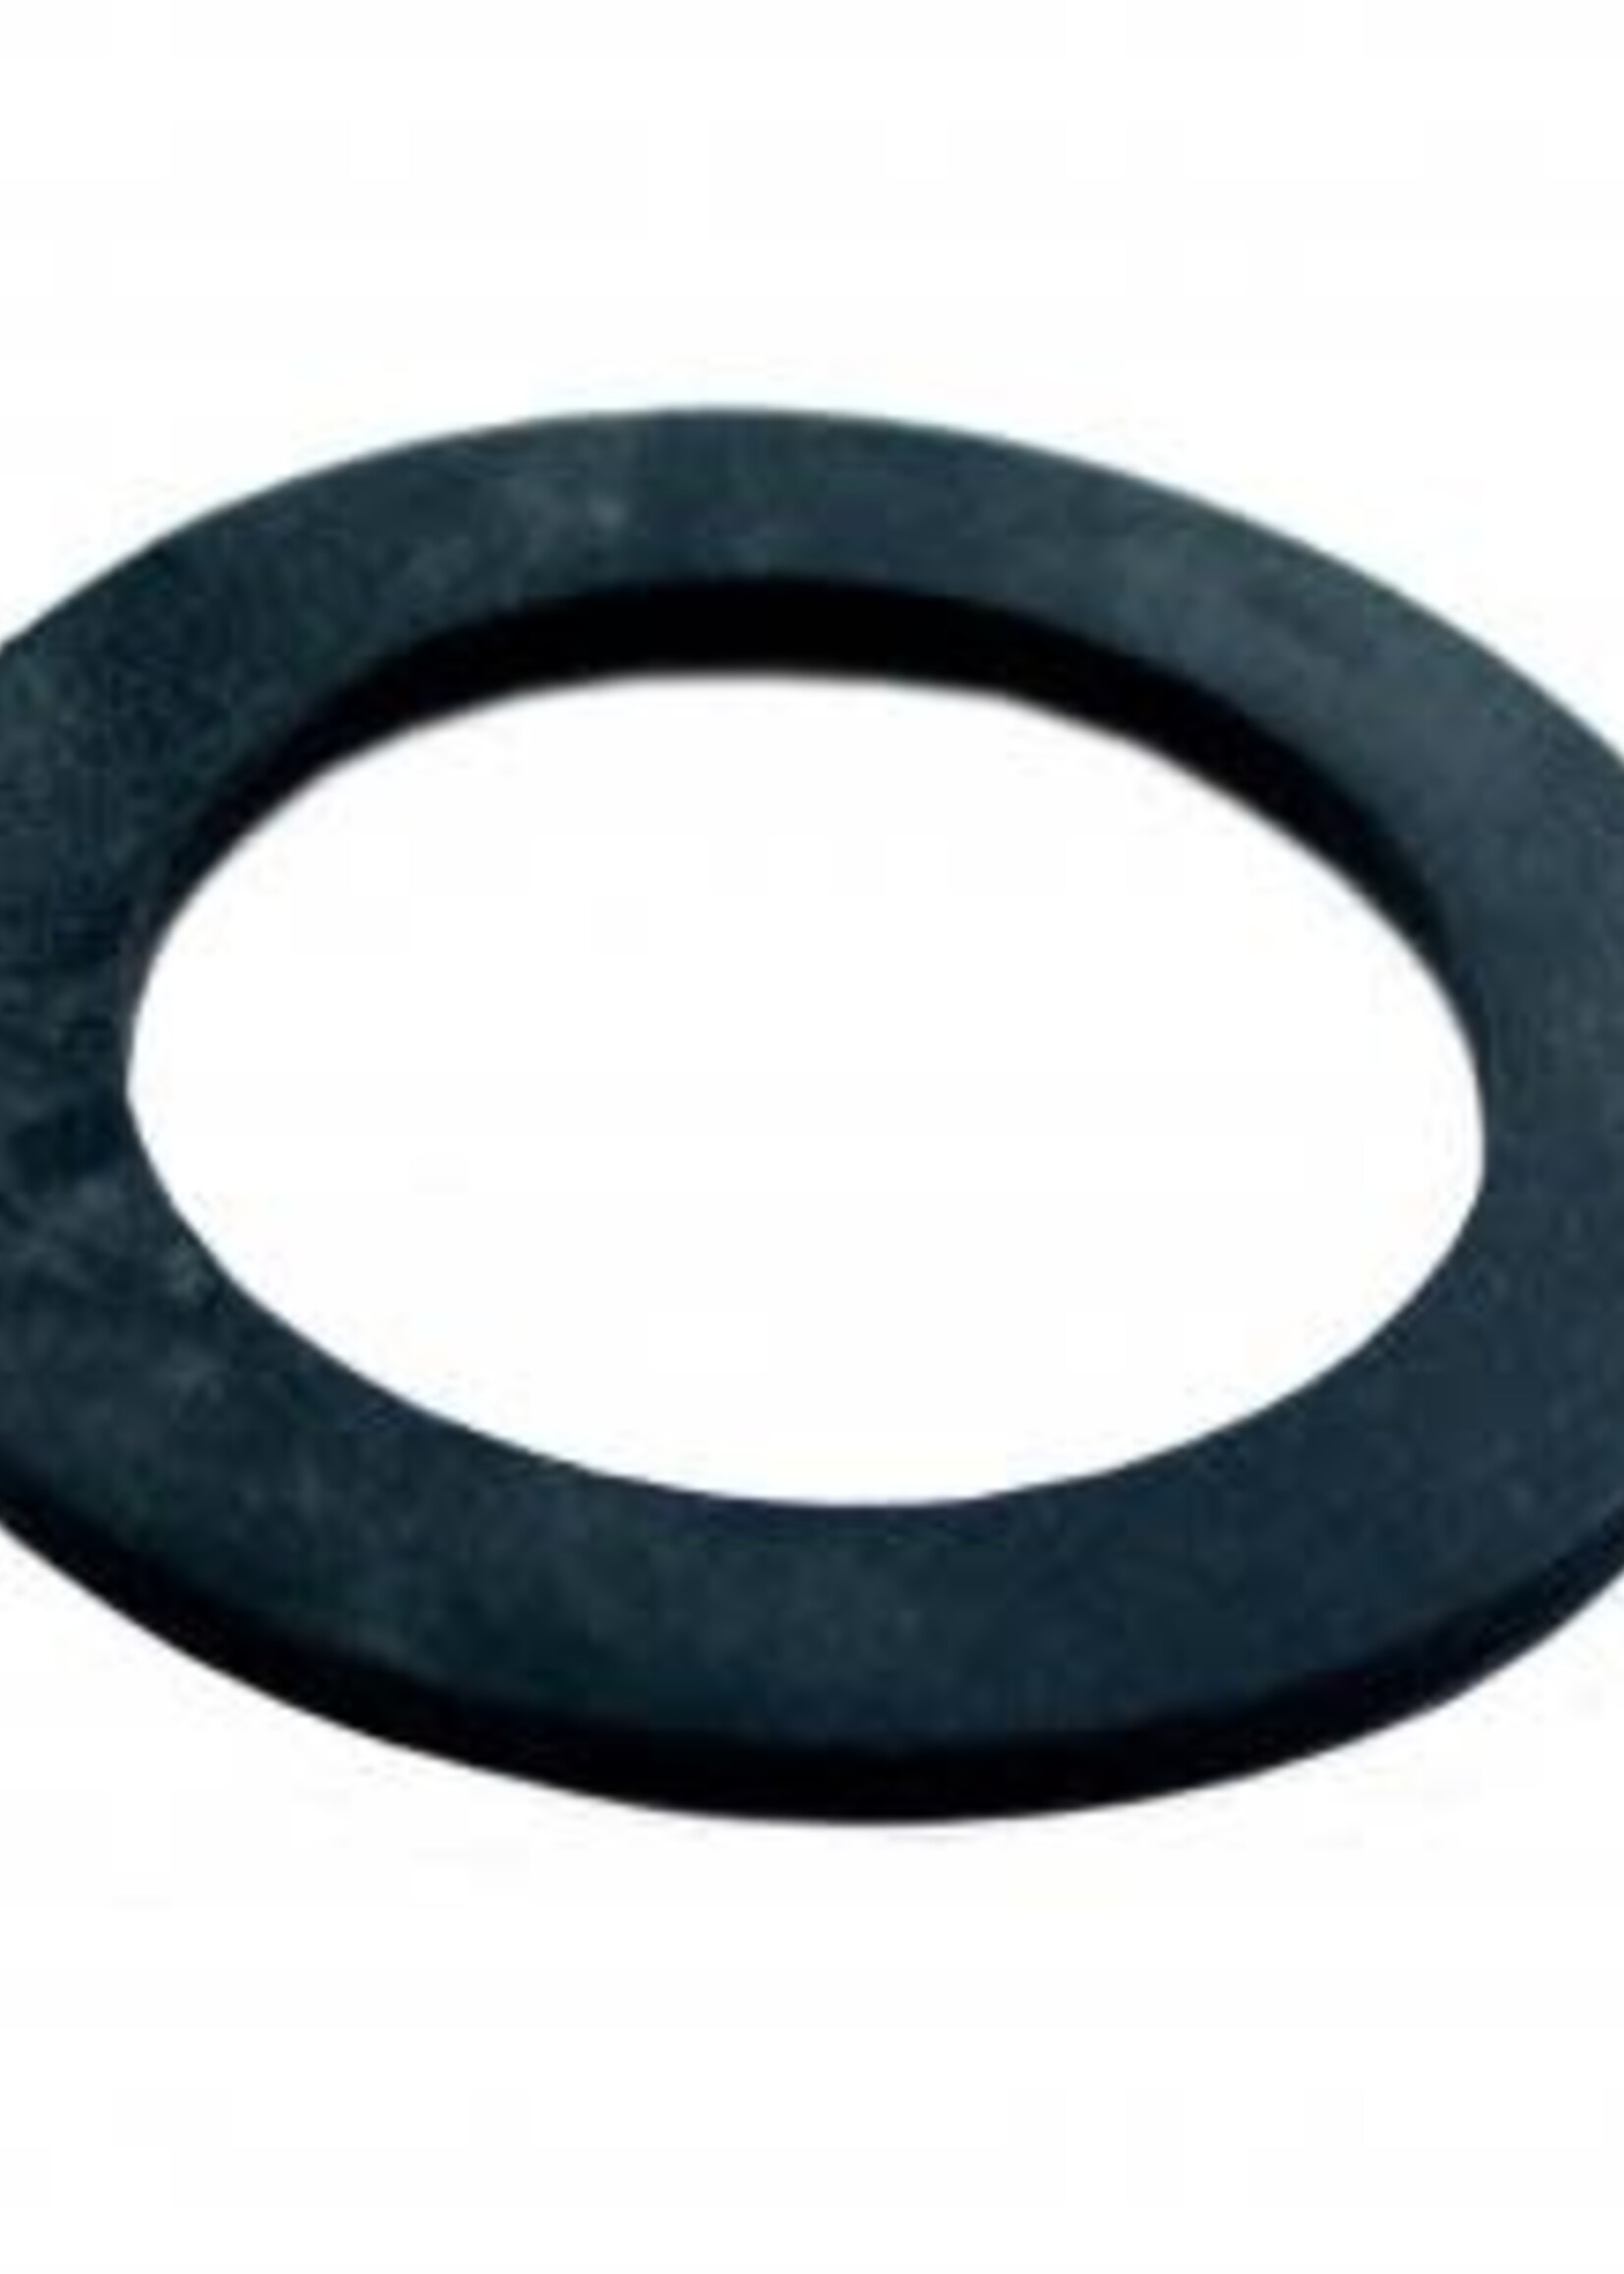 Oracstar Rubber Syphon Washer